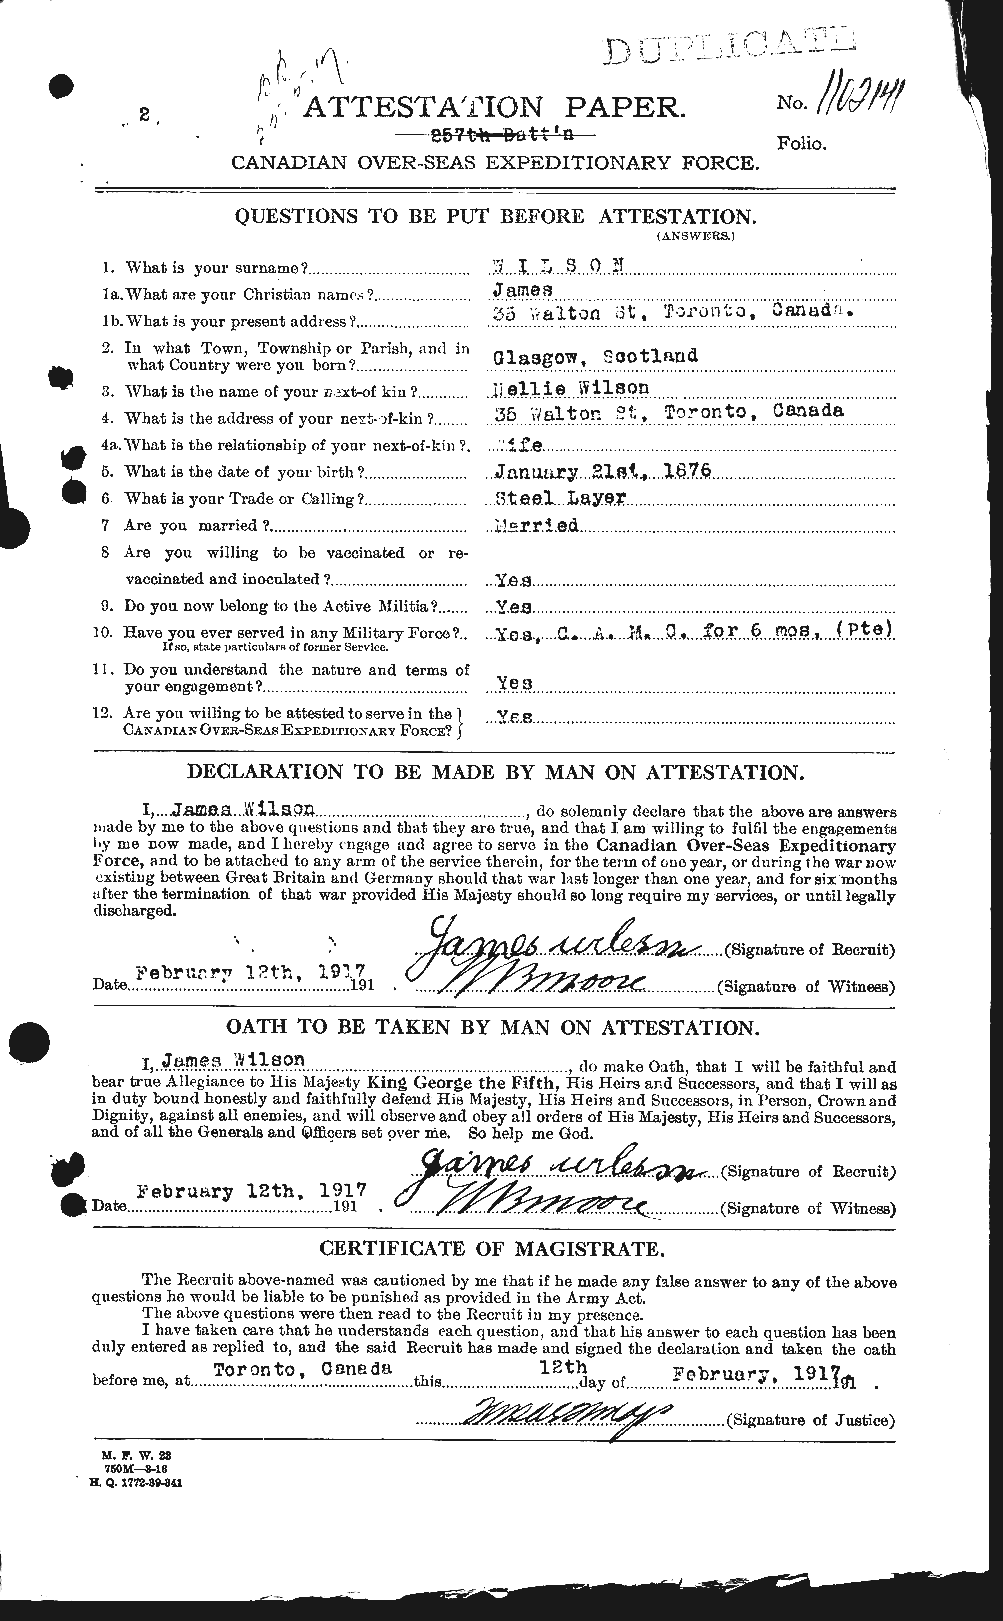 Personnel Records of the First World War - CEF 681333a